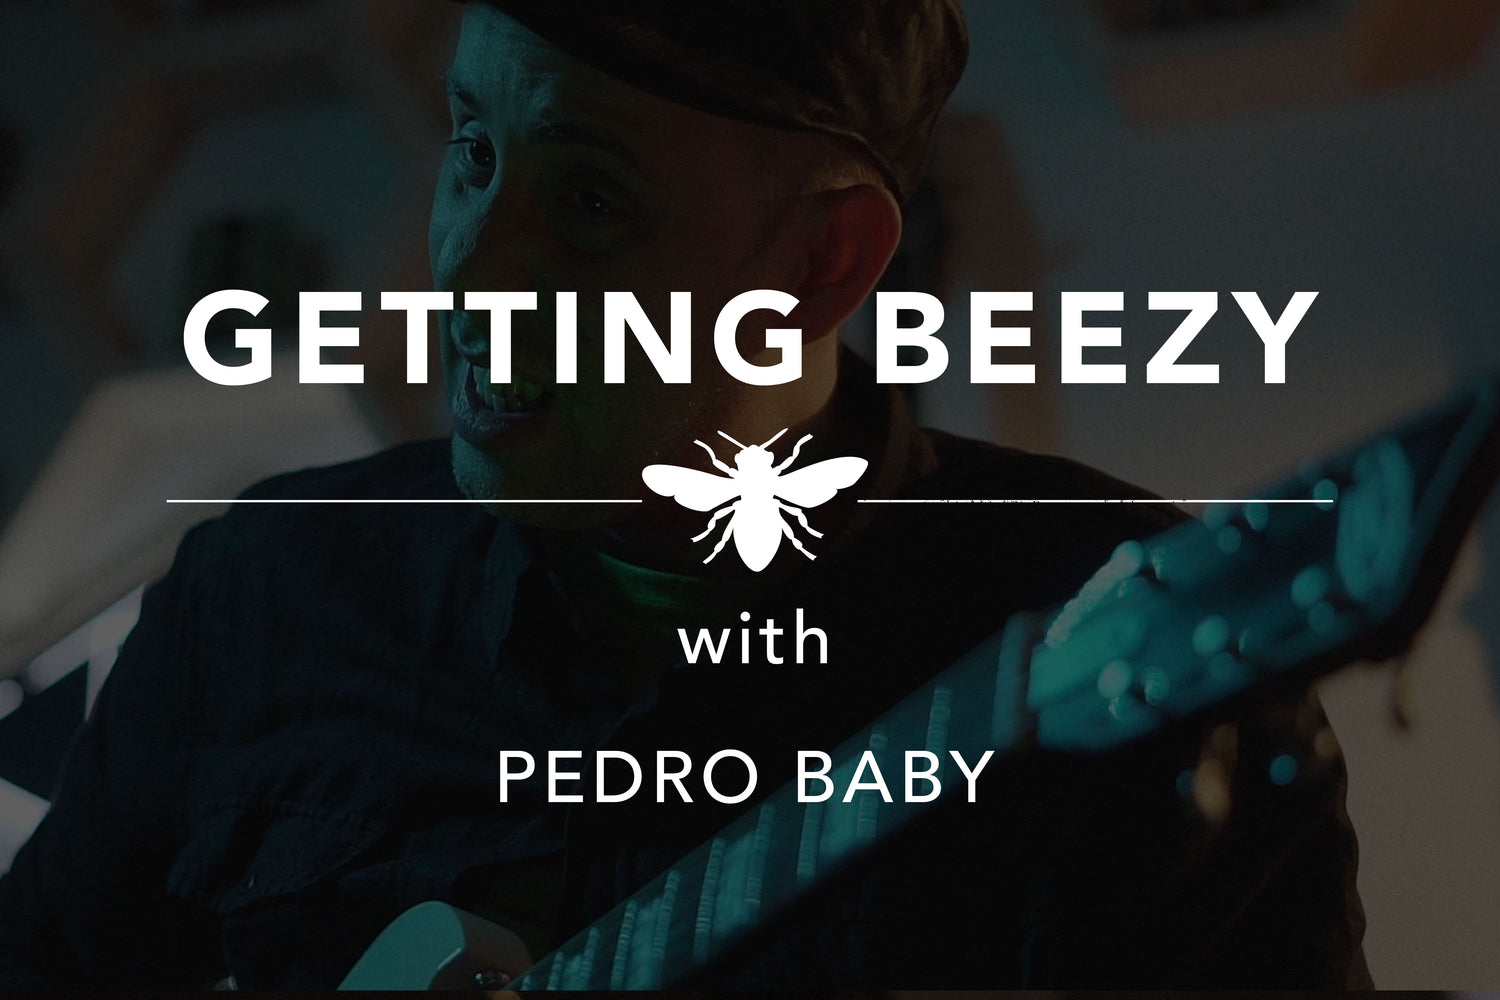 Getting Beezy with Pedro Baby